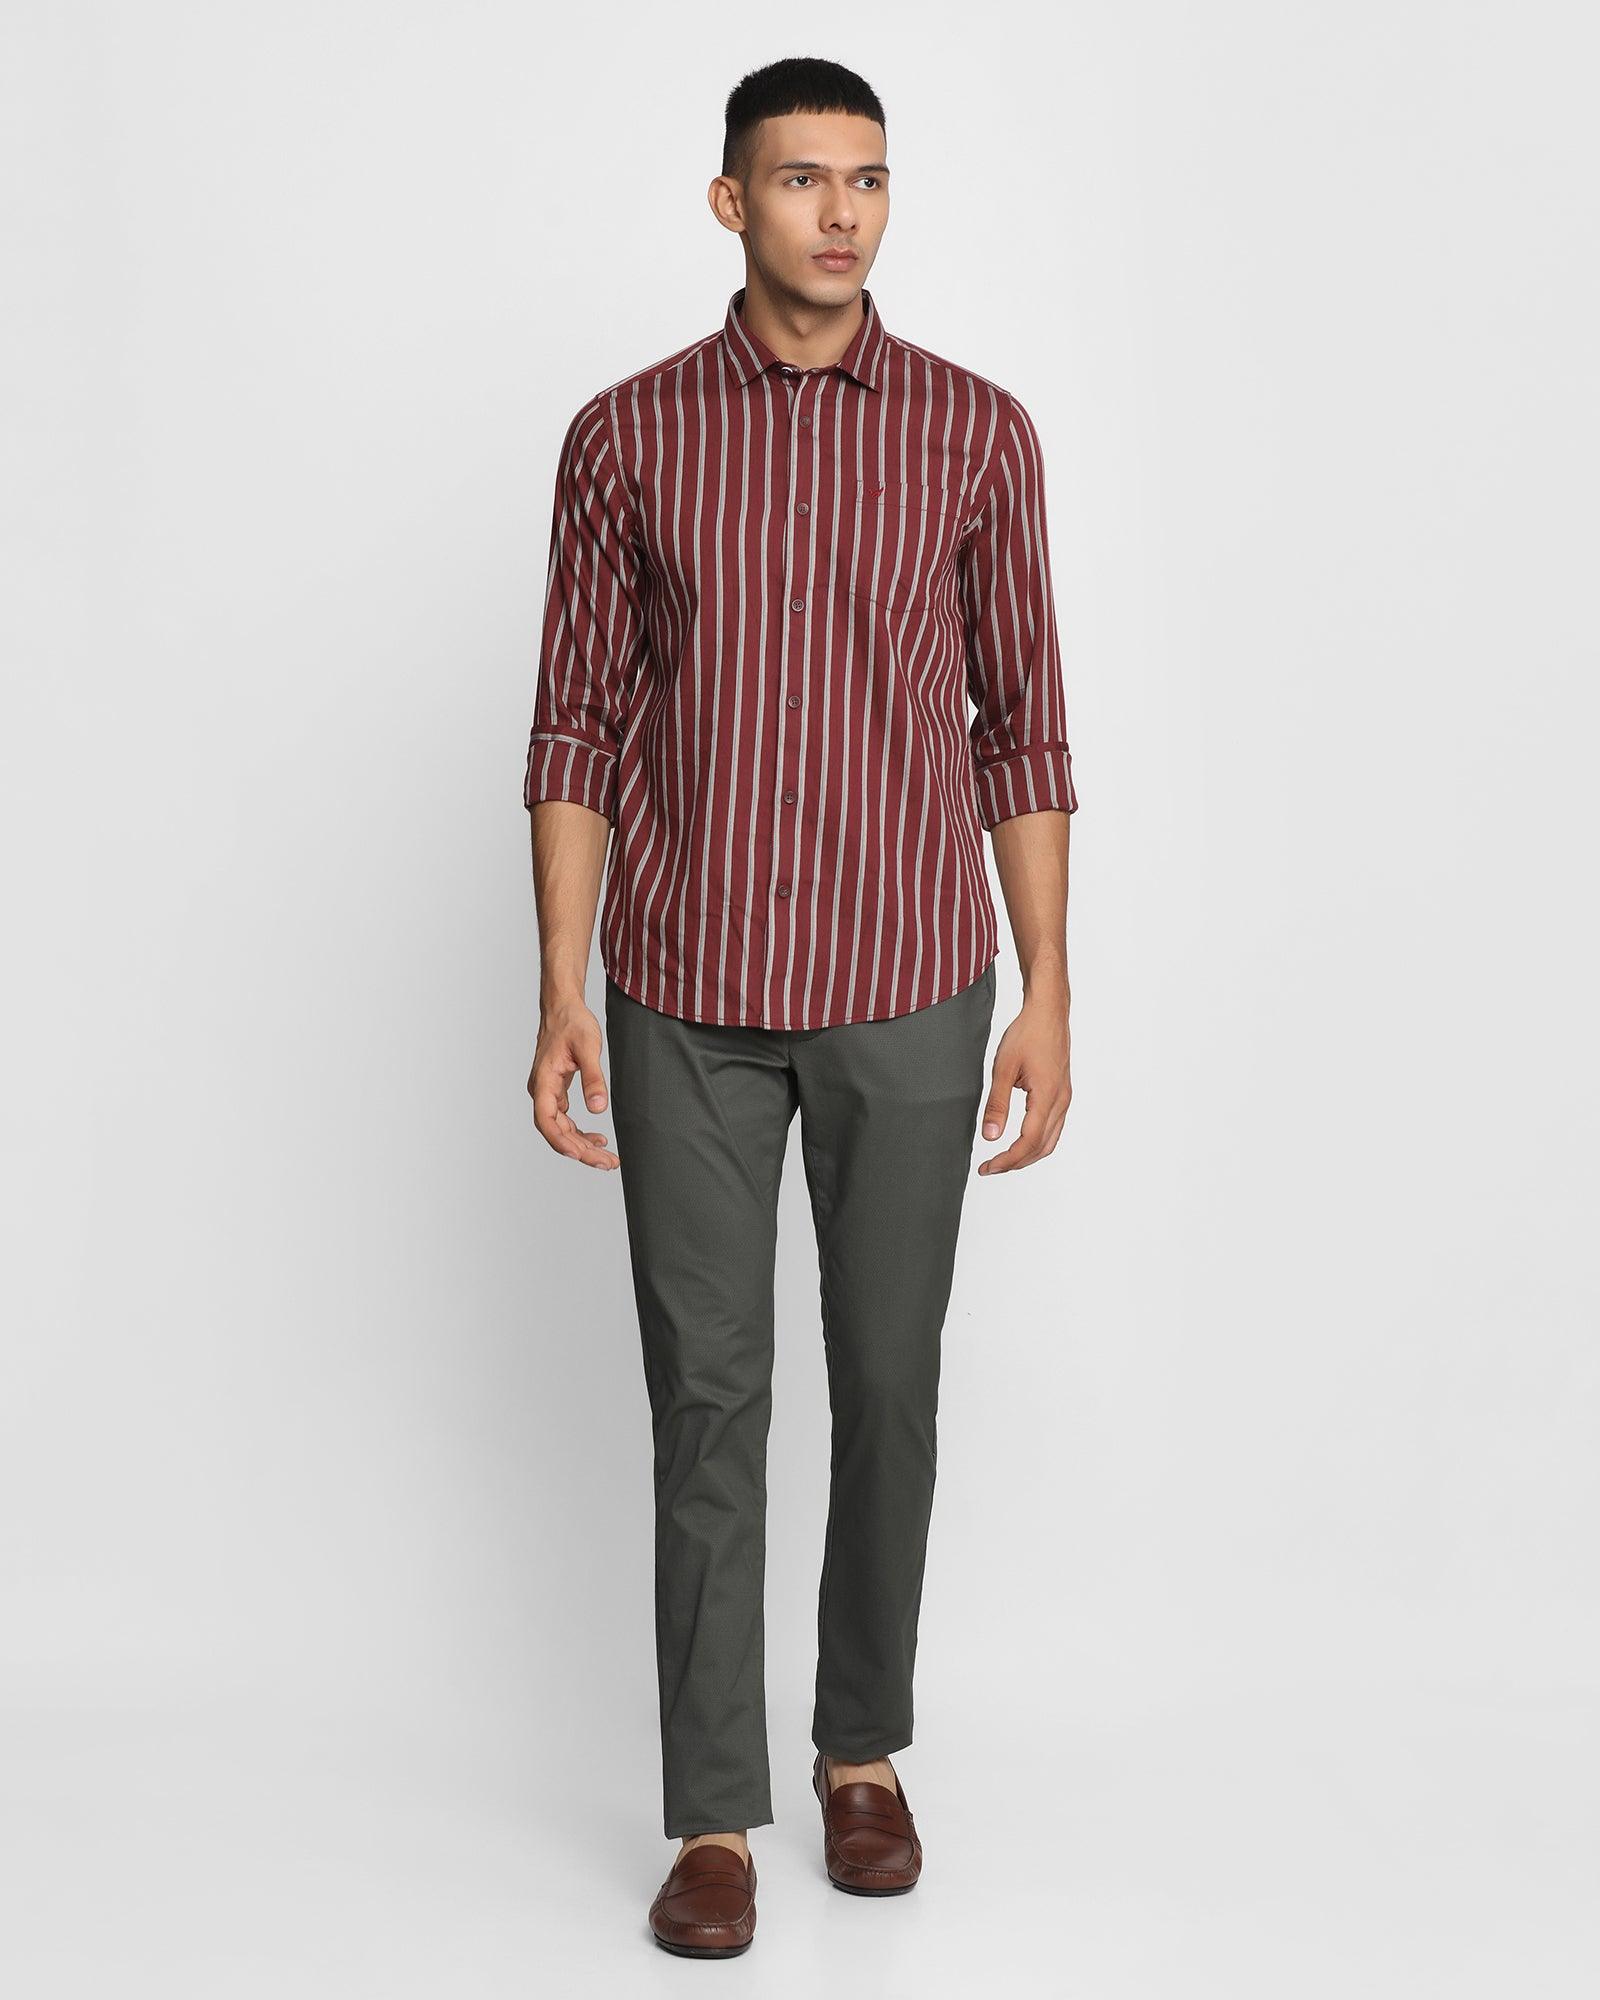 Casual Red Striped Shirt - Seatle